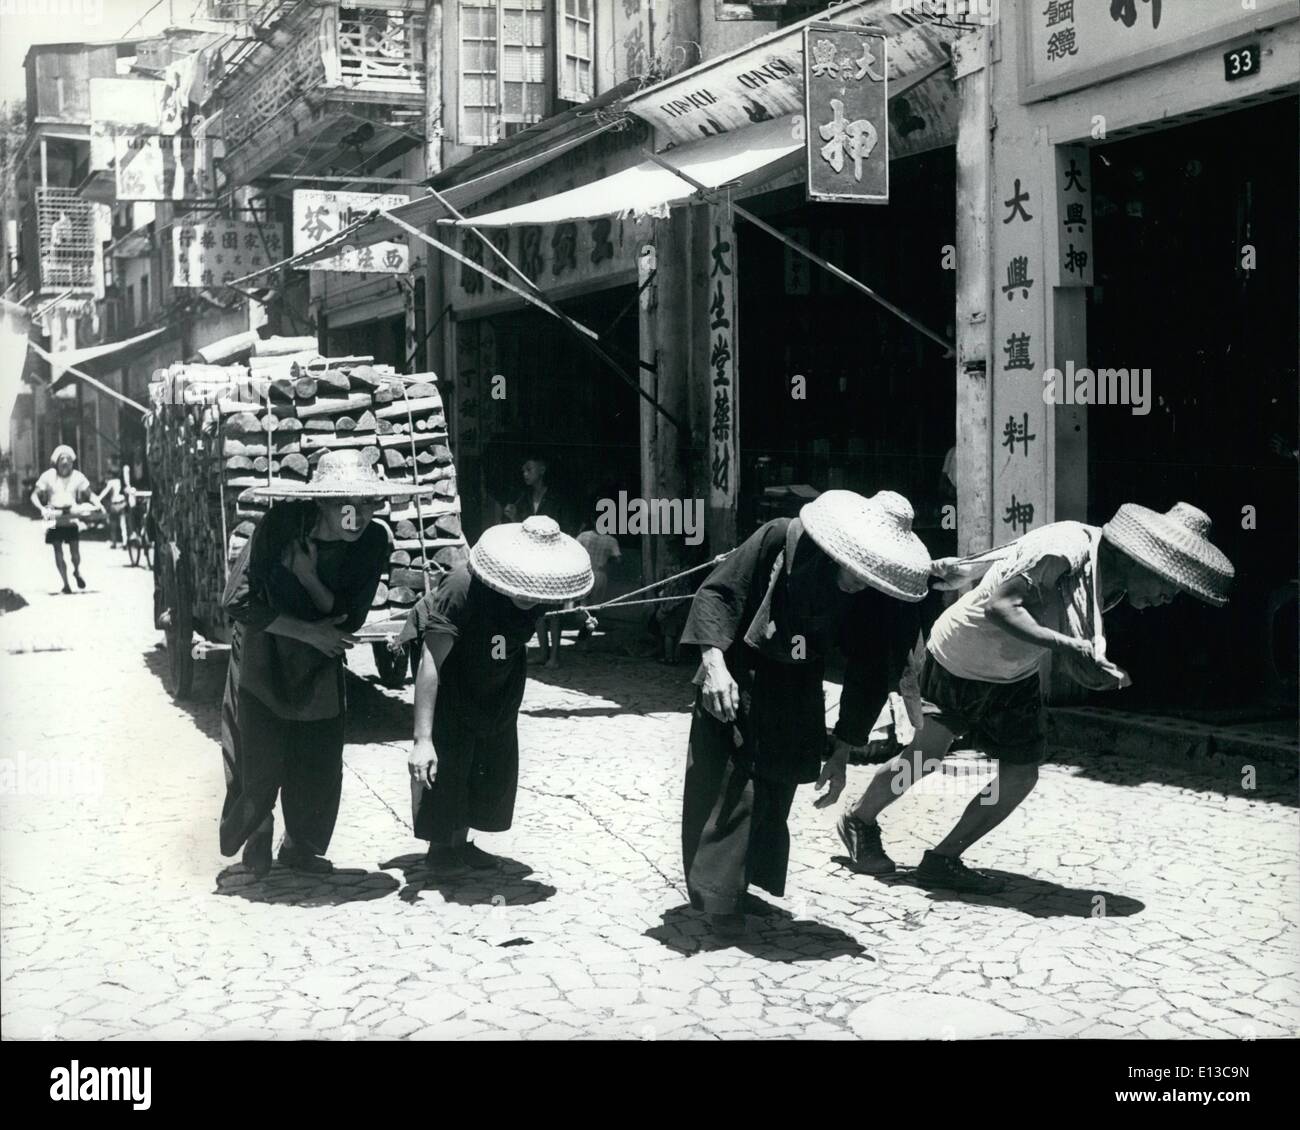 Mar. 02, 2012 - Macao women haul a heavy cart loaded with fire wood through the city streets. Stock Photo